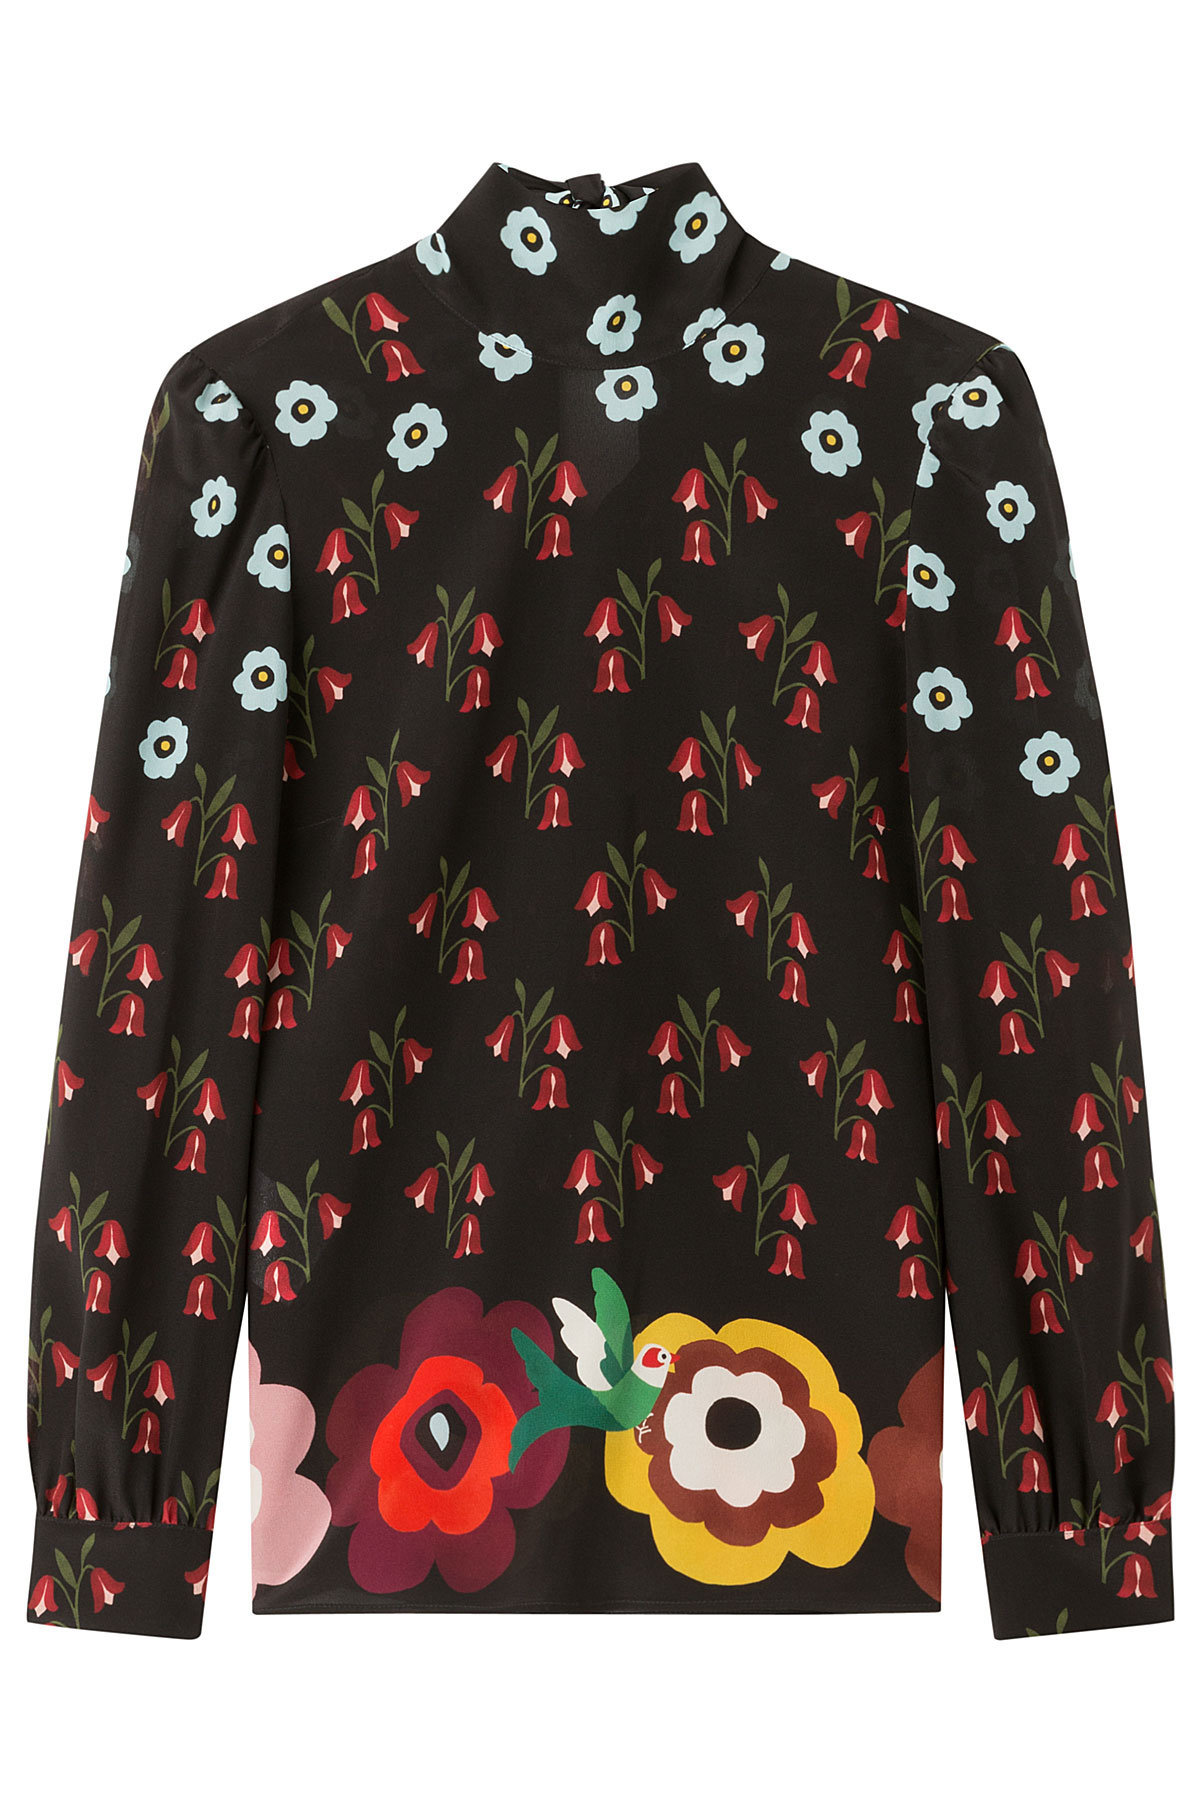 Red Valentino - Silk Floral Print Blouse